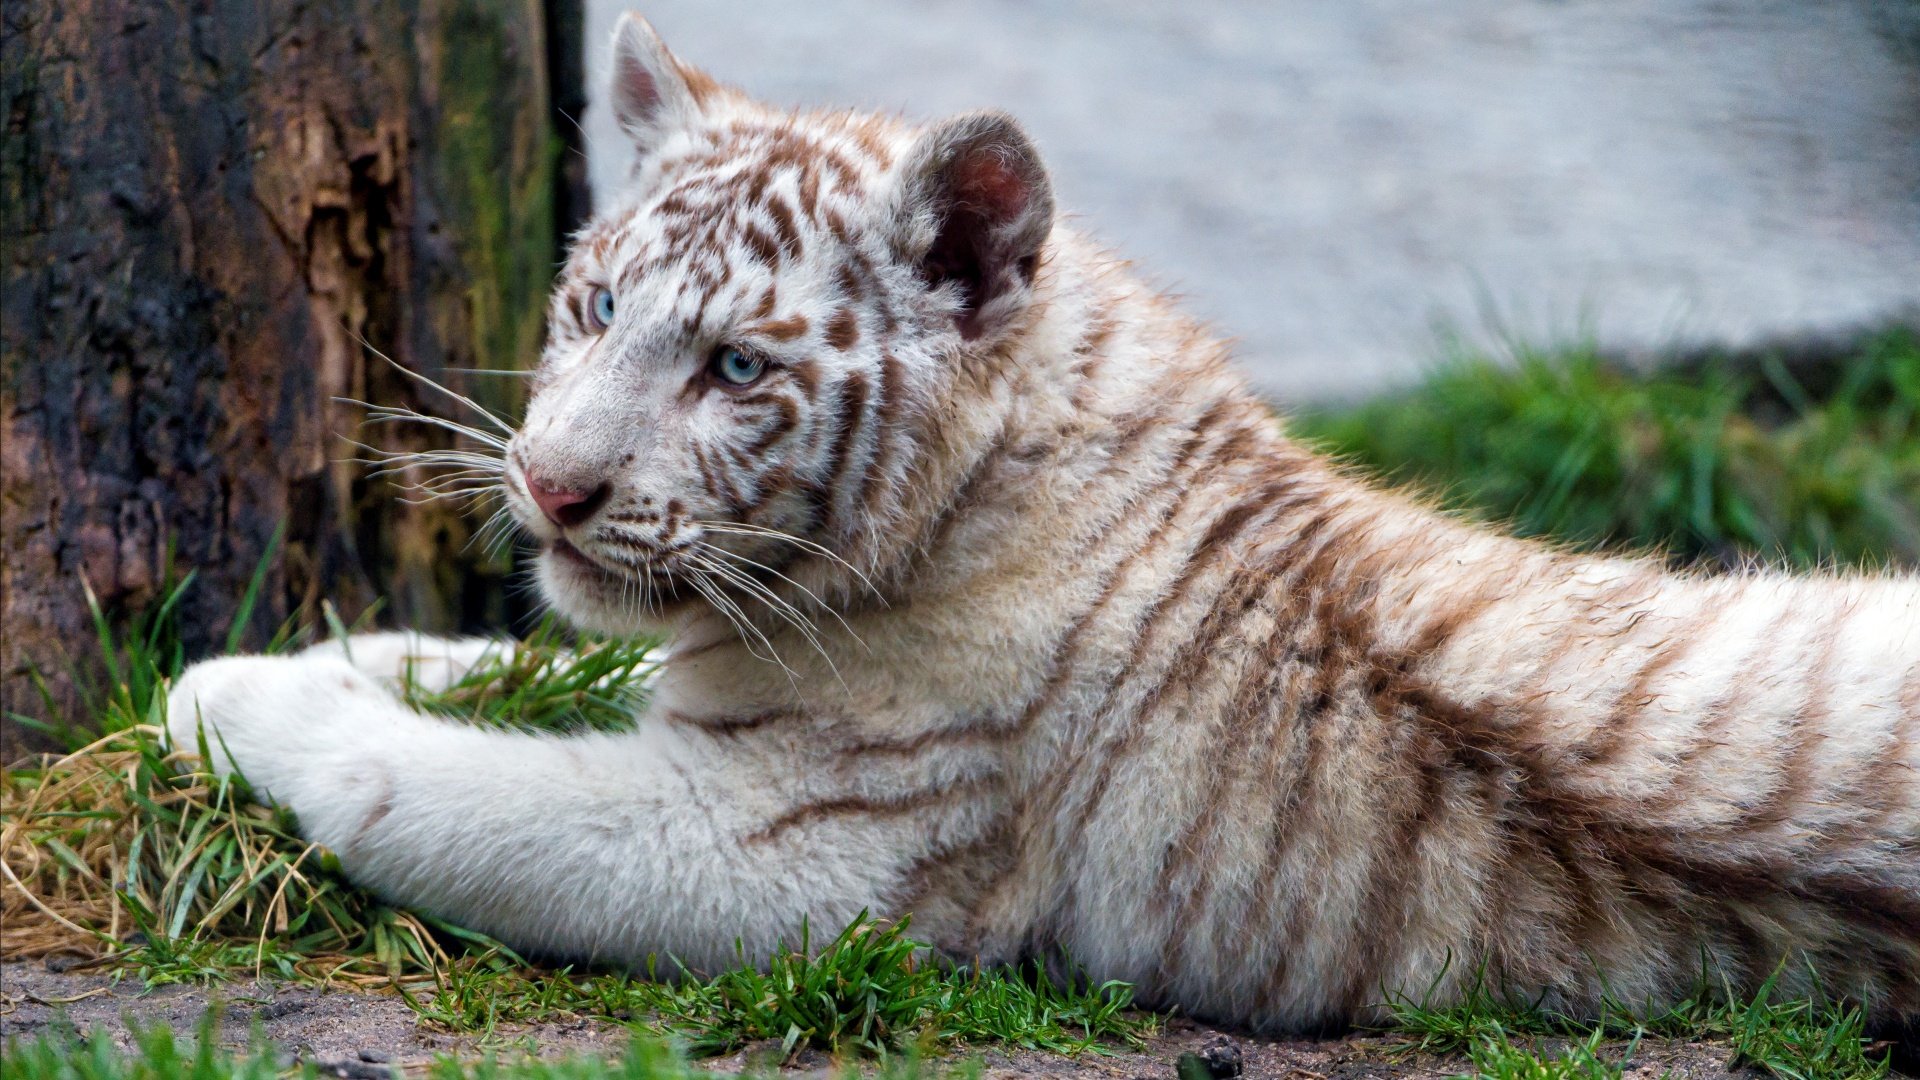 Chilling White Tiger Cub Wallpapers   1920x1080   948024